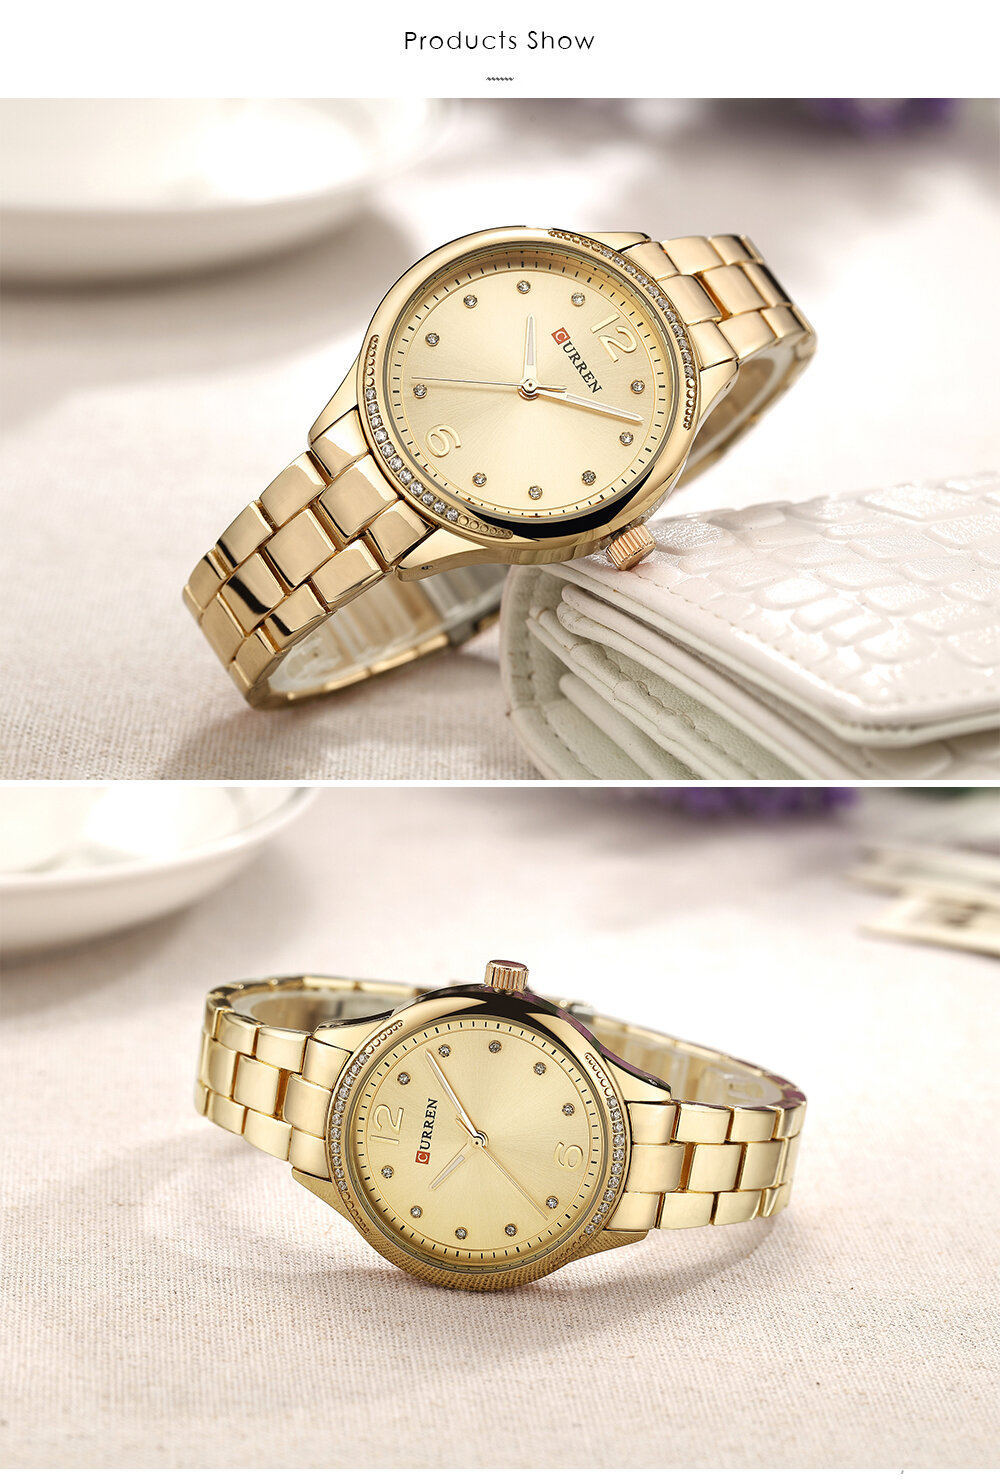 Casual Quartz Wrist Watch Stainless Steel Band Round Dial Simple Numerical Watches for Women